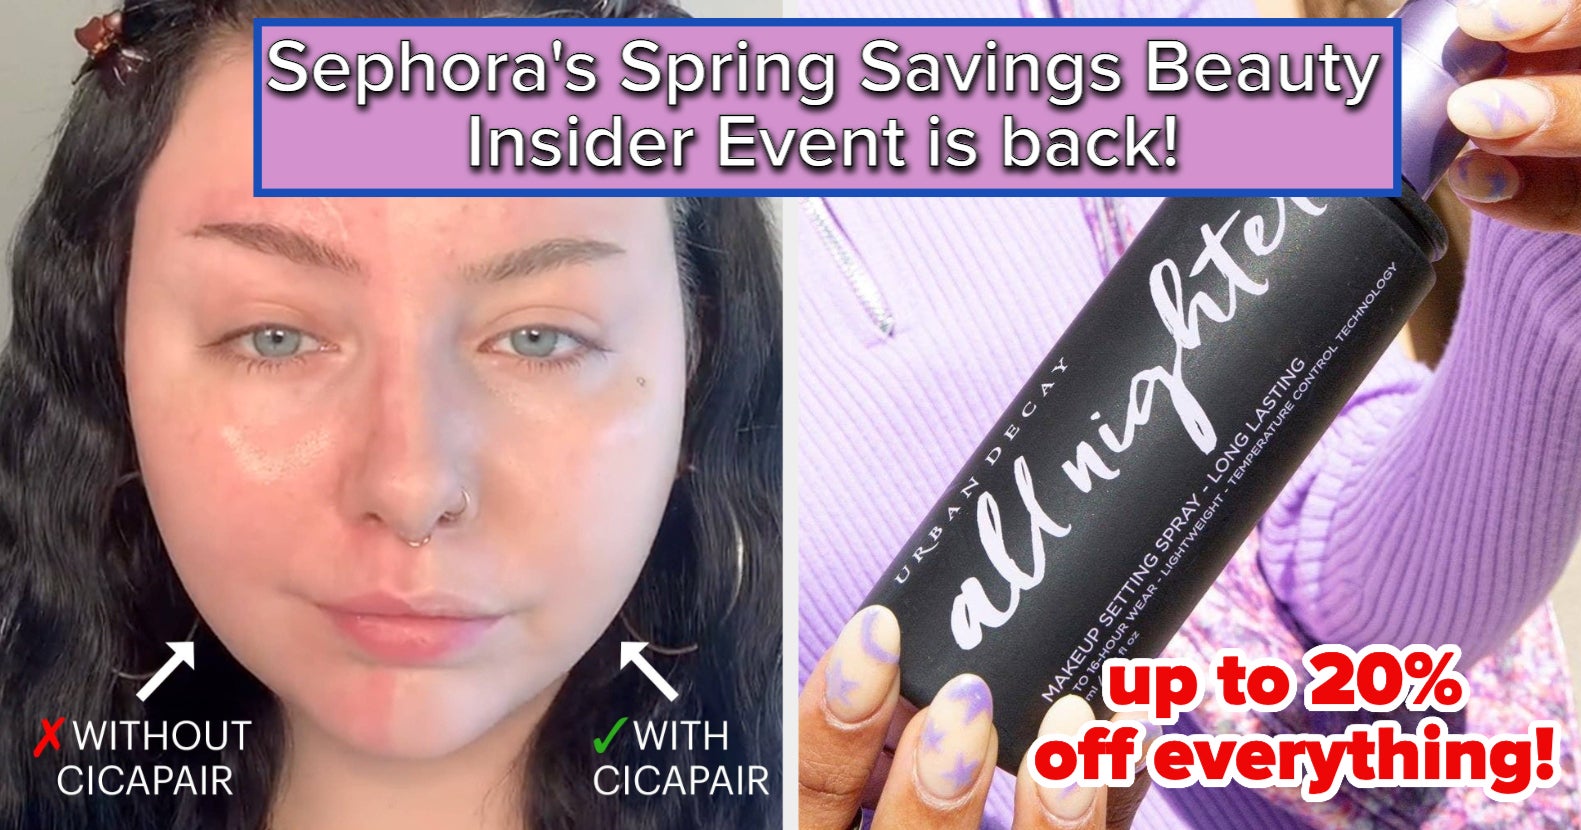 Sephora's Spring Savings Event Means Deals On Everything